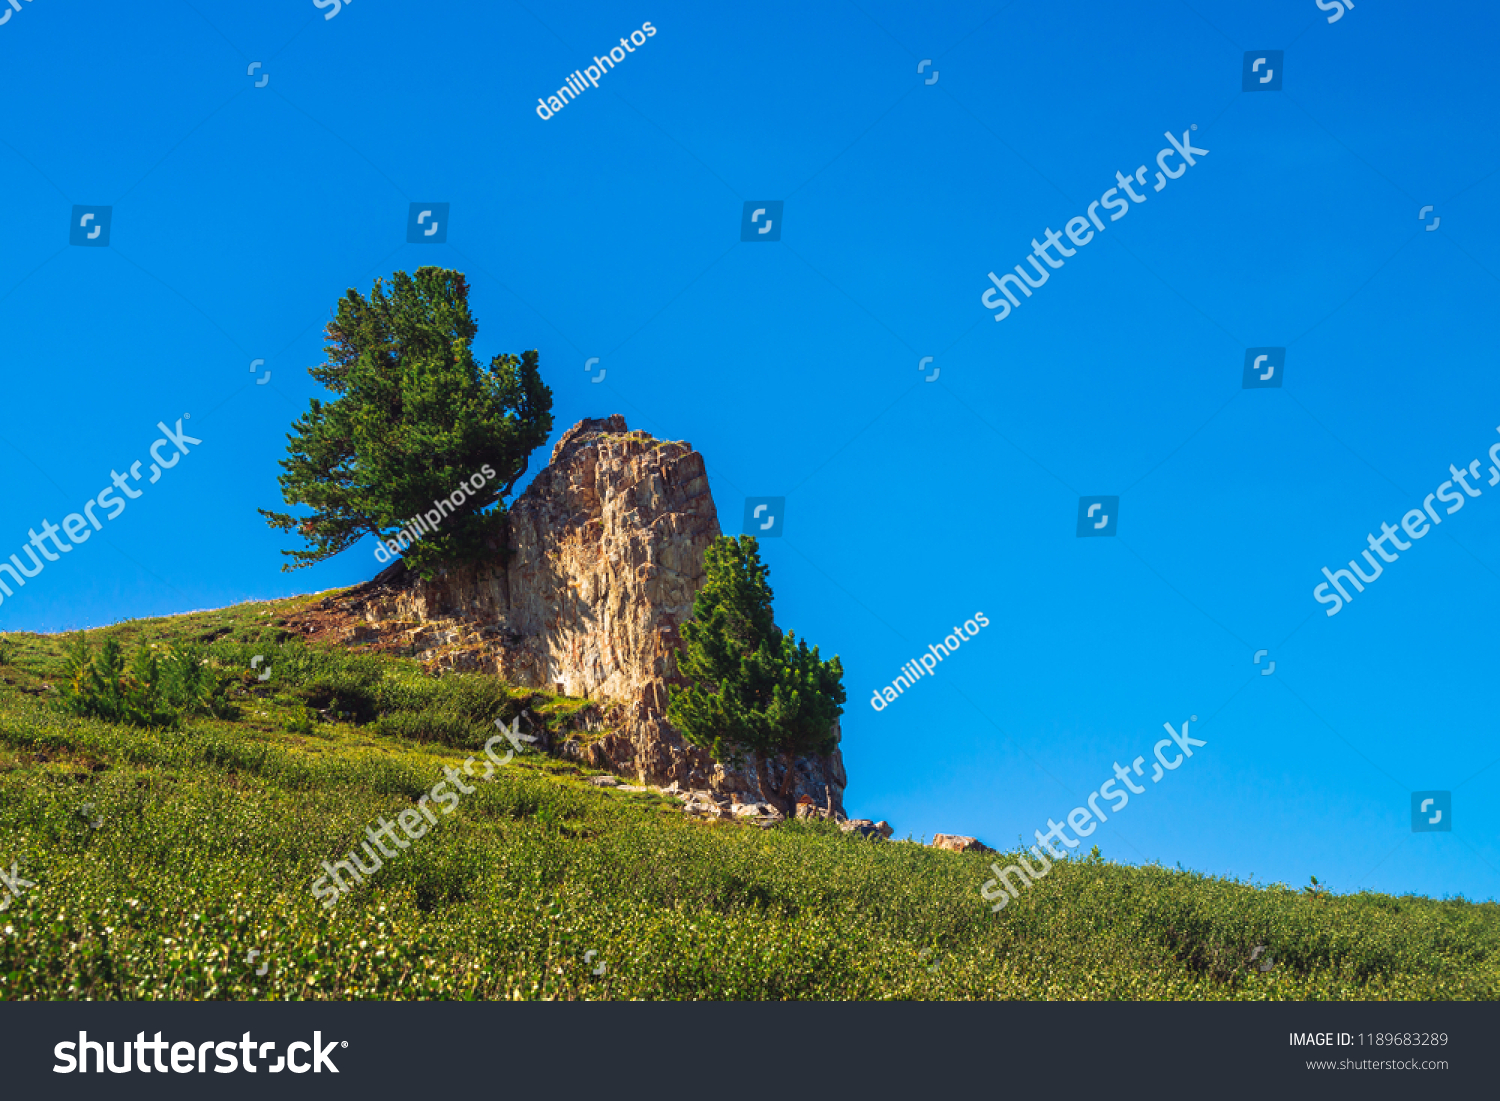 Amazing cedar grows on beautiful rocky stone on green hill in sunny day. Rich vegetation of highlands under blue sky. Branches of coniferous tree shine with sun. Unimaginable mountain landscape. #1189683289